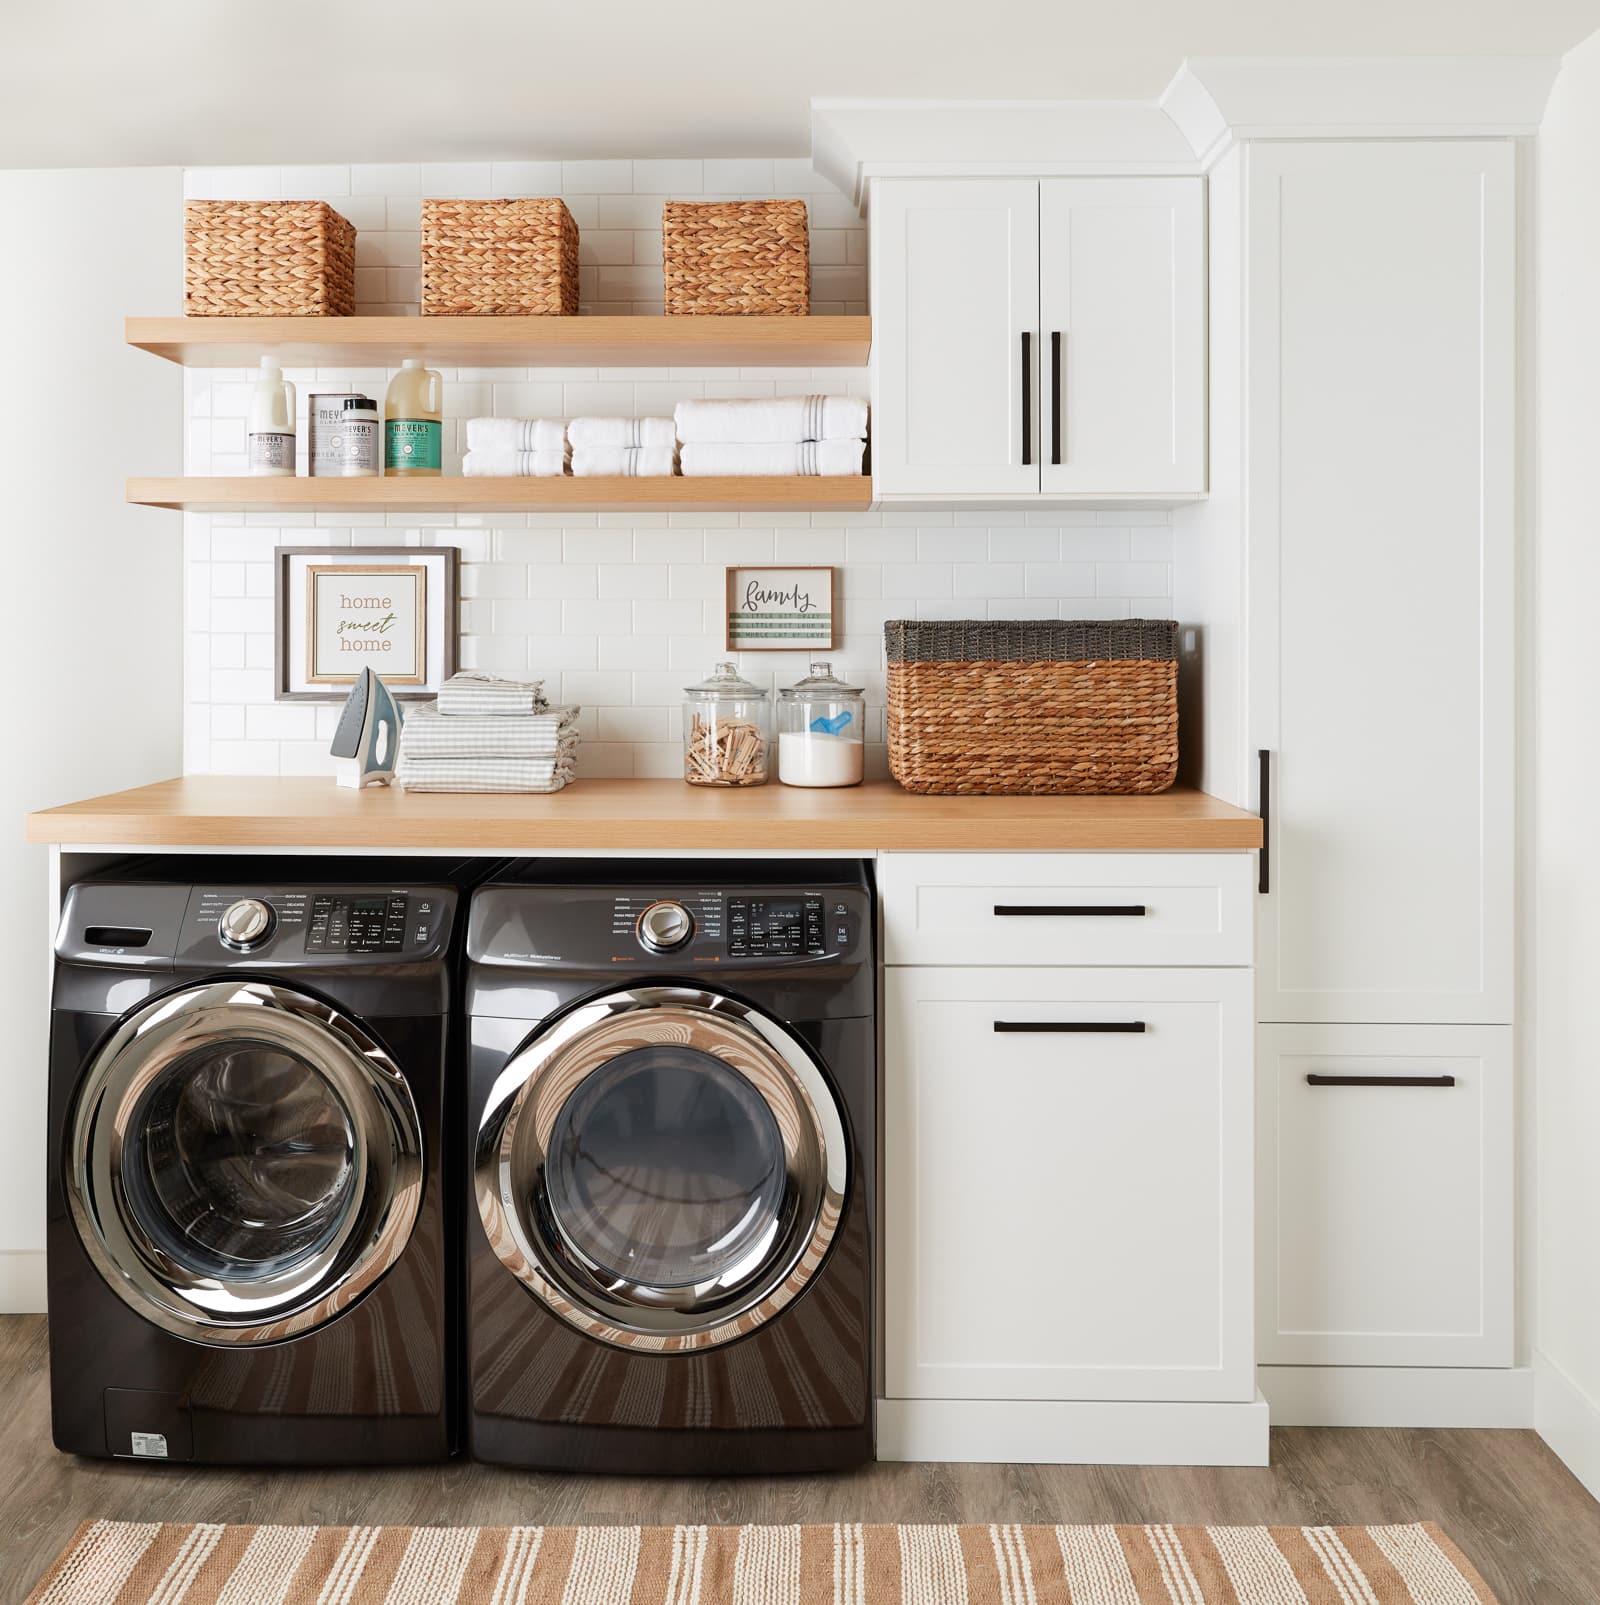 Laundry room cabinets with washer and dryer